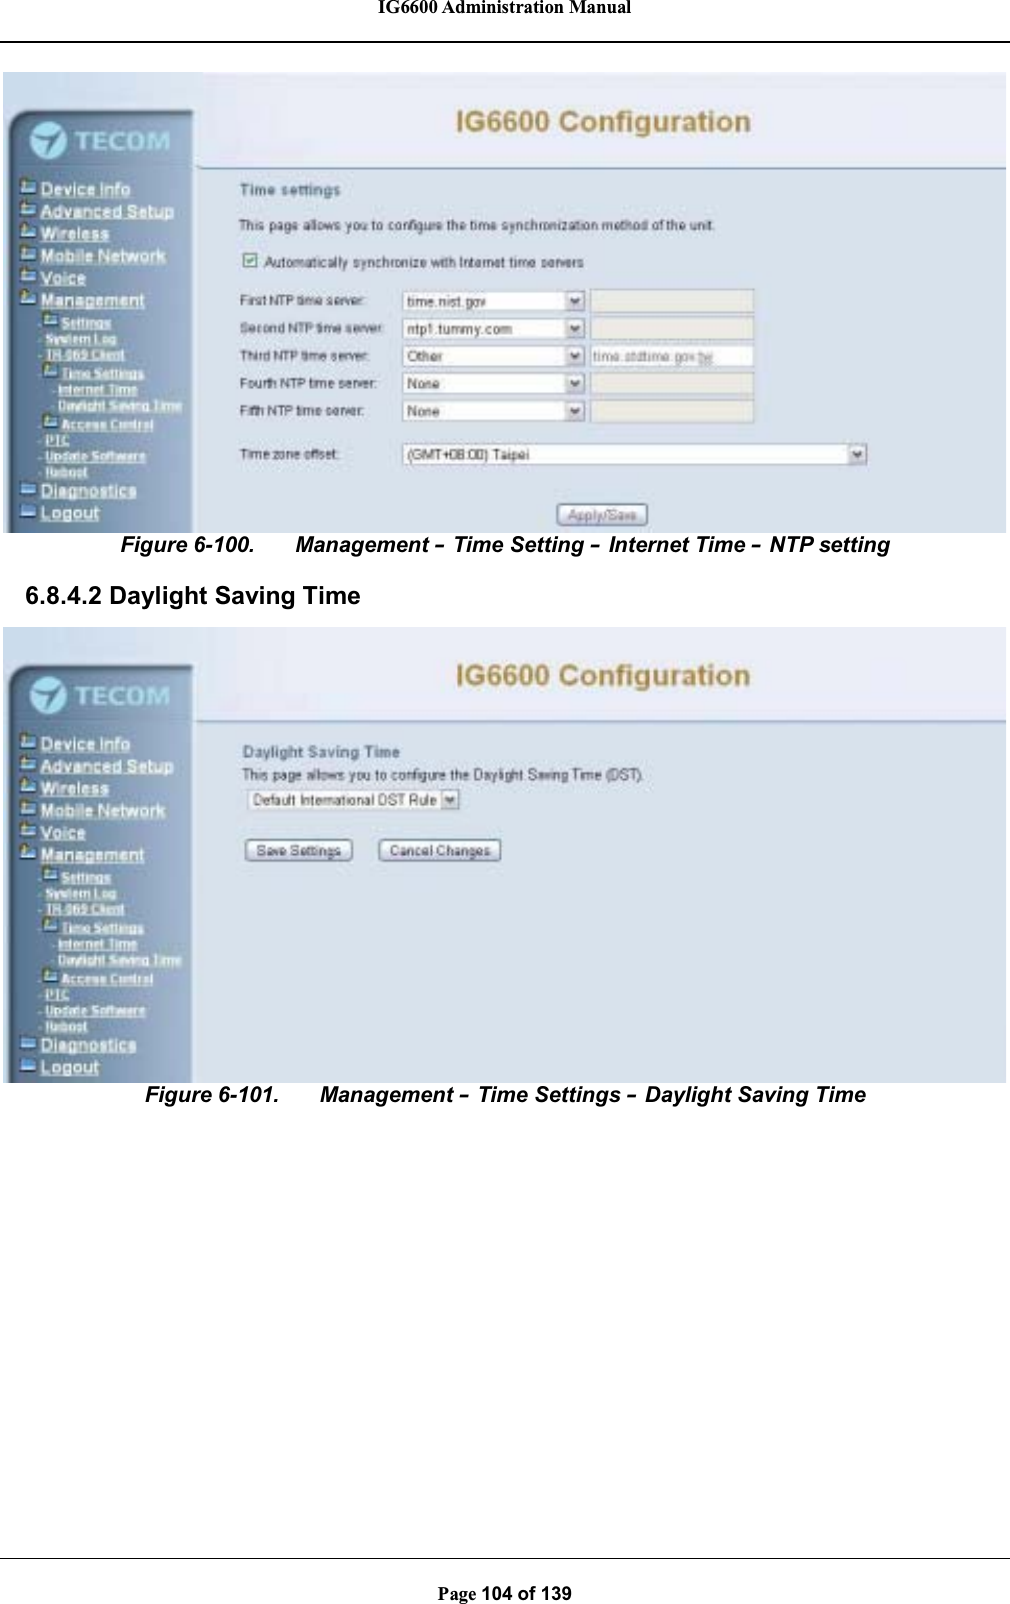 IG6600 Administration ManualPage 104 of 139Figure 6-100. Management –Time Setting –Internet Time –NTP setting6.8.4.2 Daylight Saving TimeFigure 6-101. Management –Time Settings –Daylight Saving Time